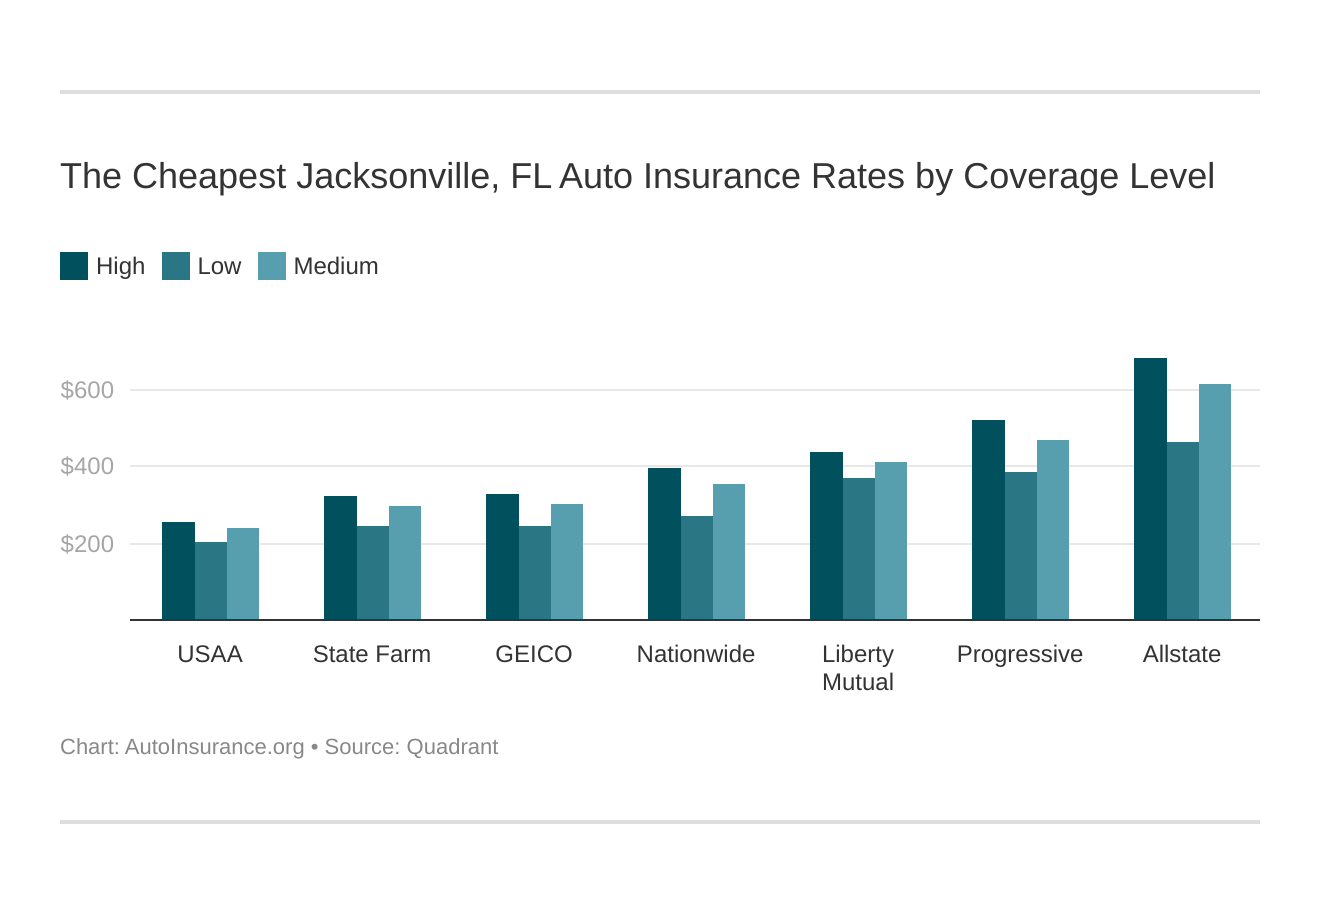 The Cheapest Jacksonville, FL Auto Insurance Rates by Coverage Level